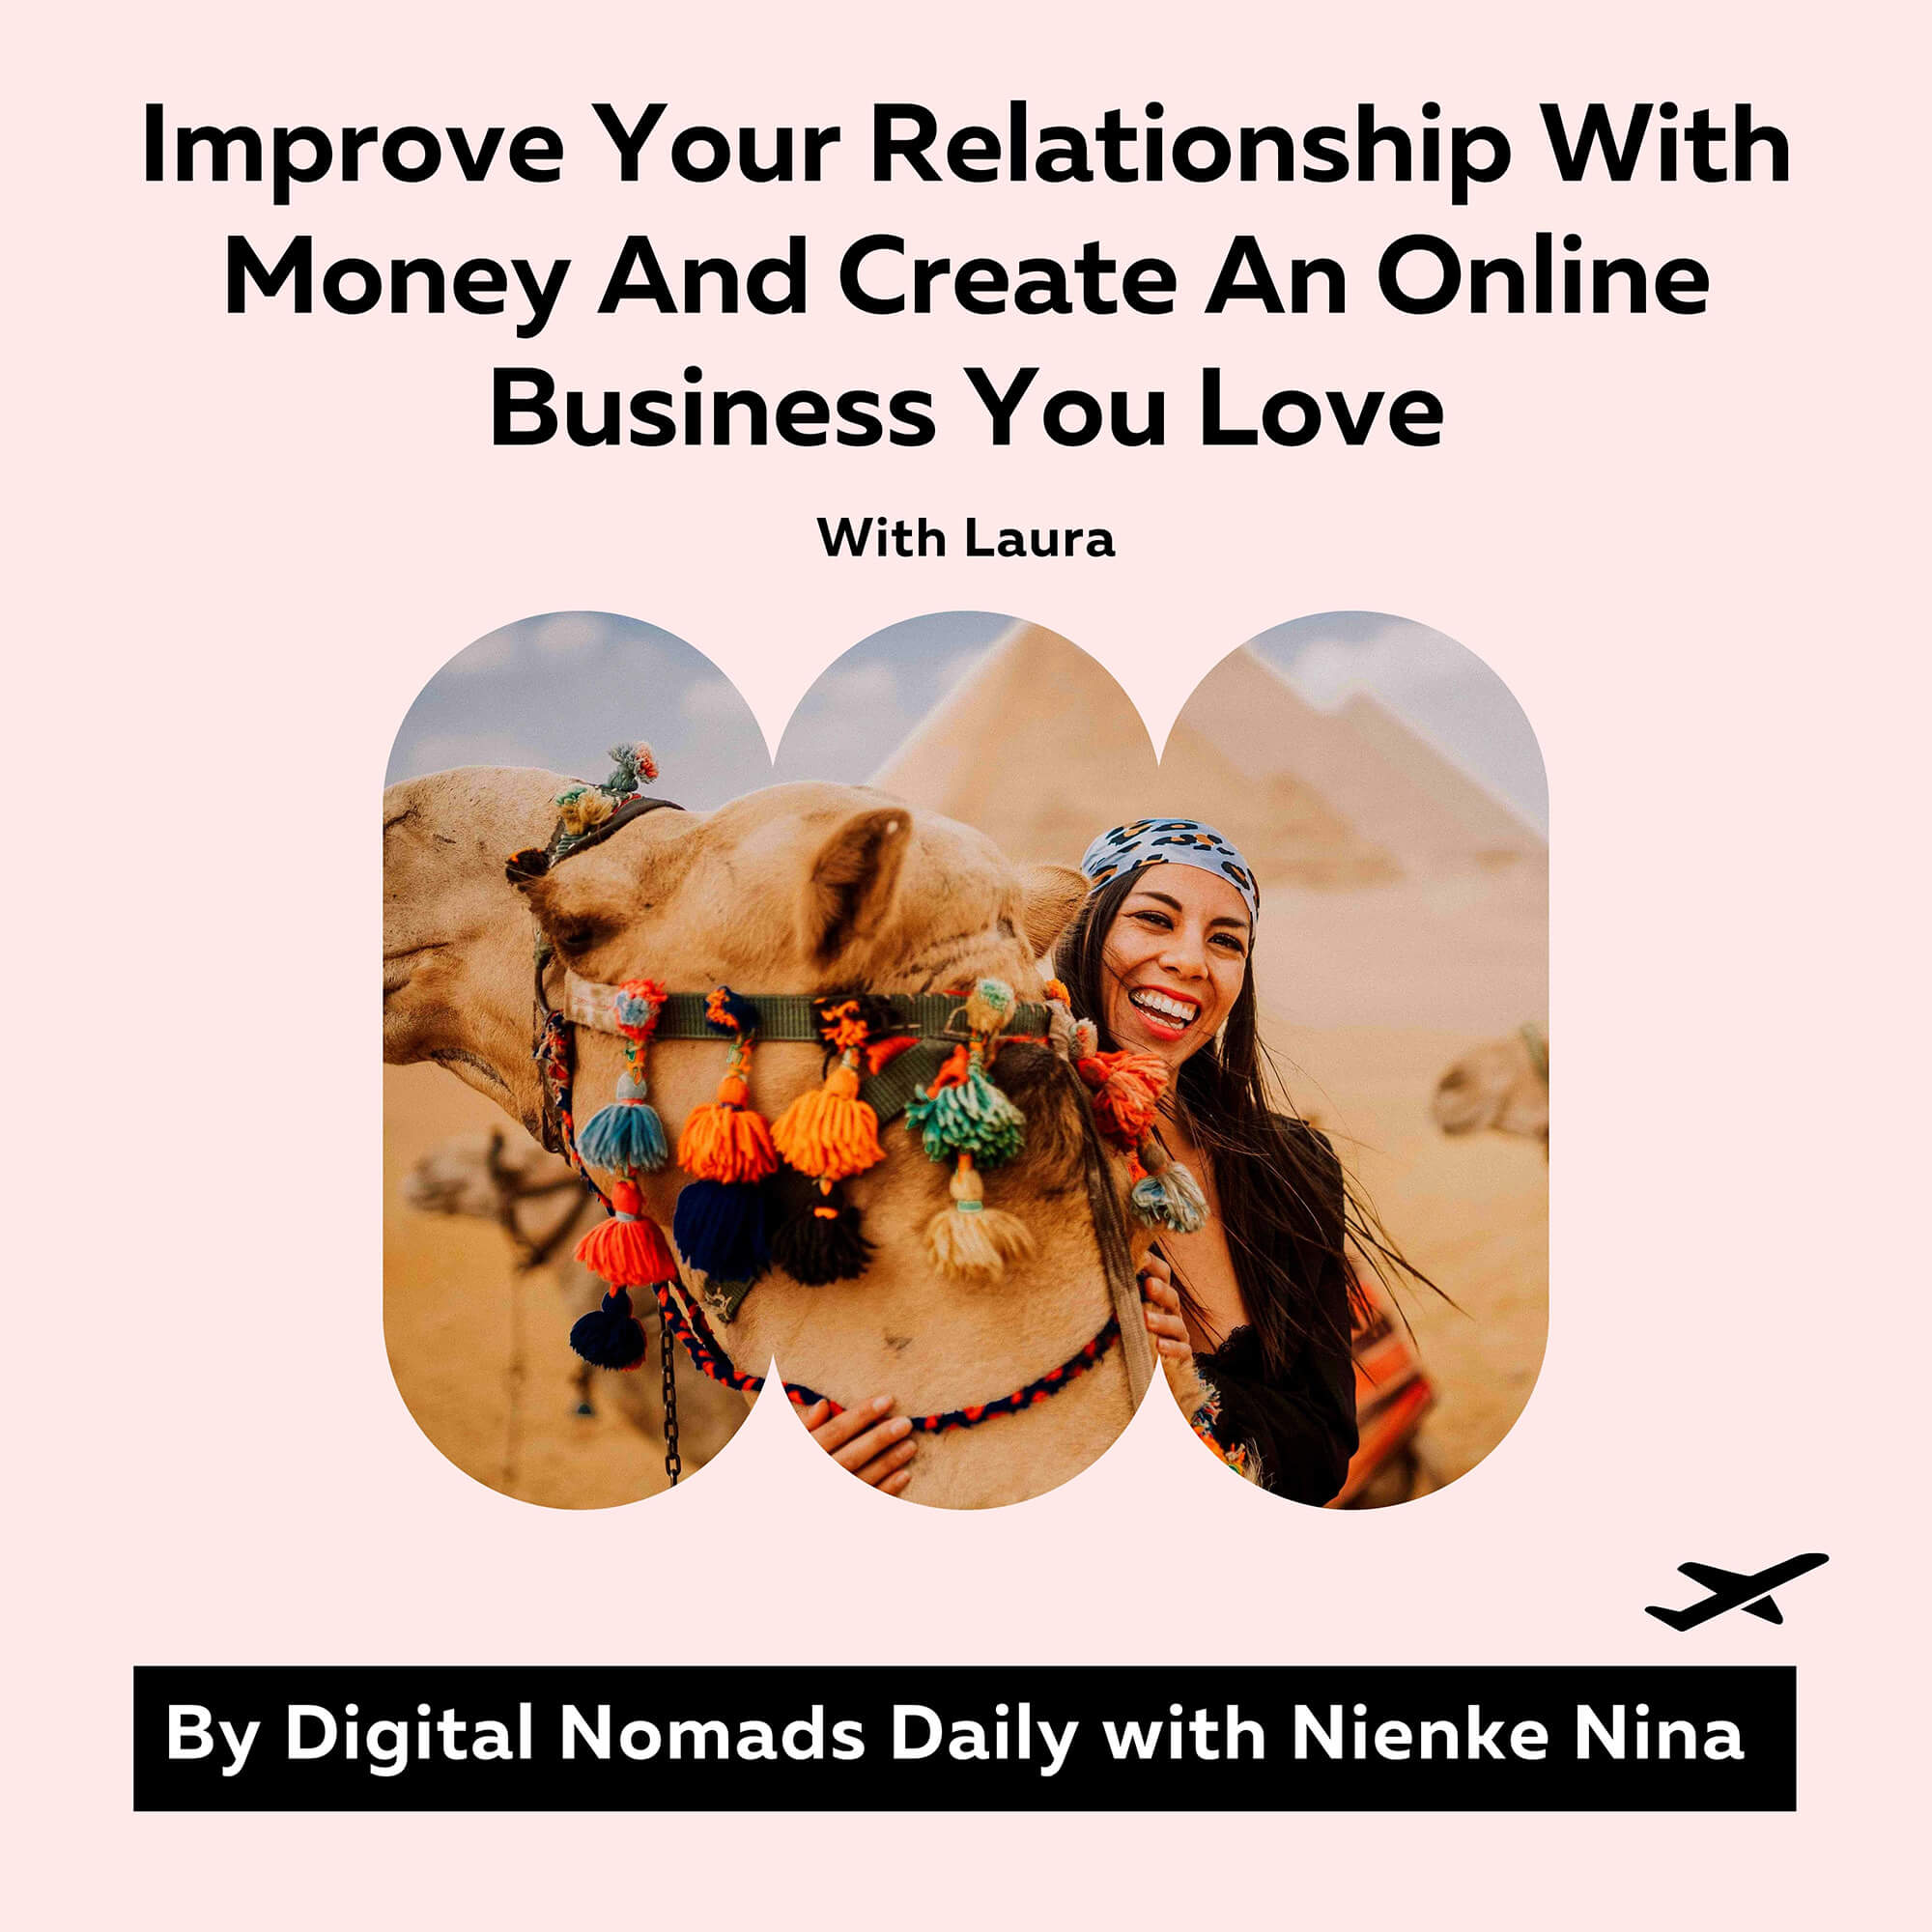 Digital Nomads Daily Podcast Cover How To Improve Your Relationship With Money And Create An Online Business You Love With Laura Hennings (1)